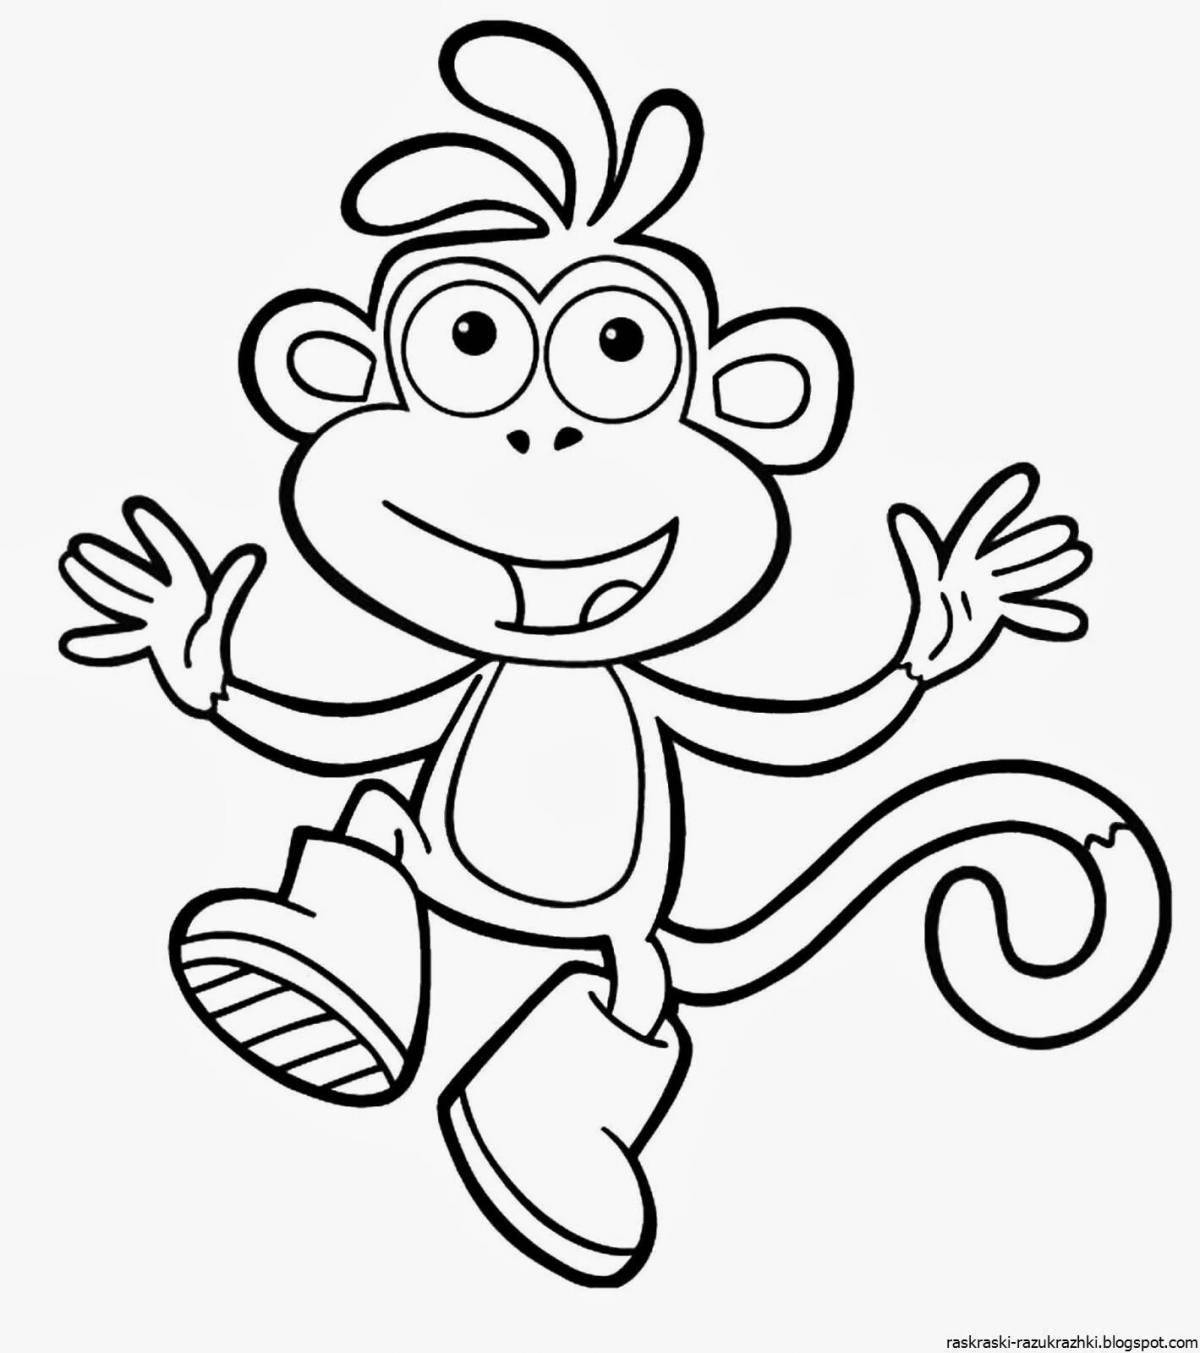 Coloring book bright monkey